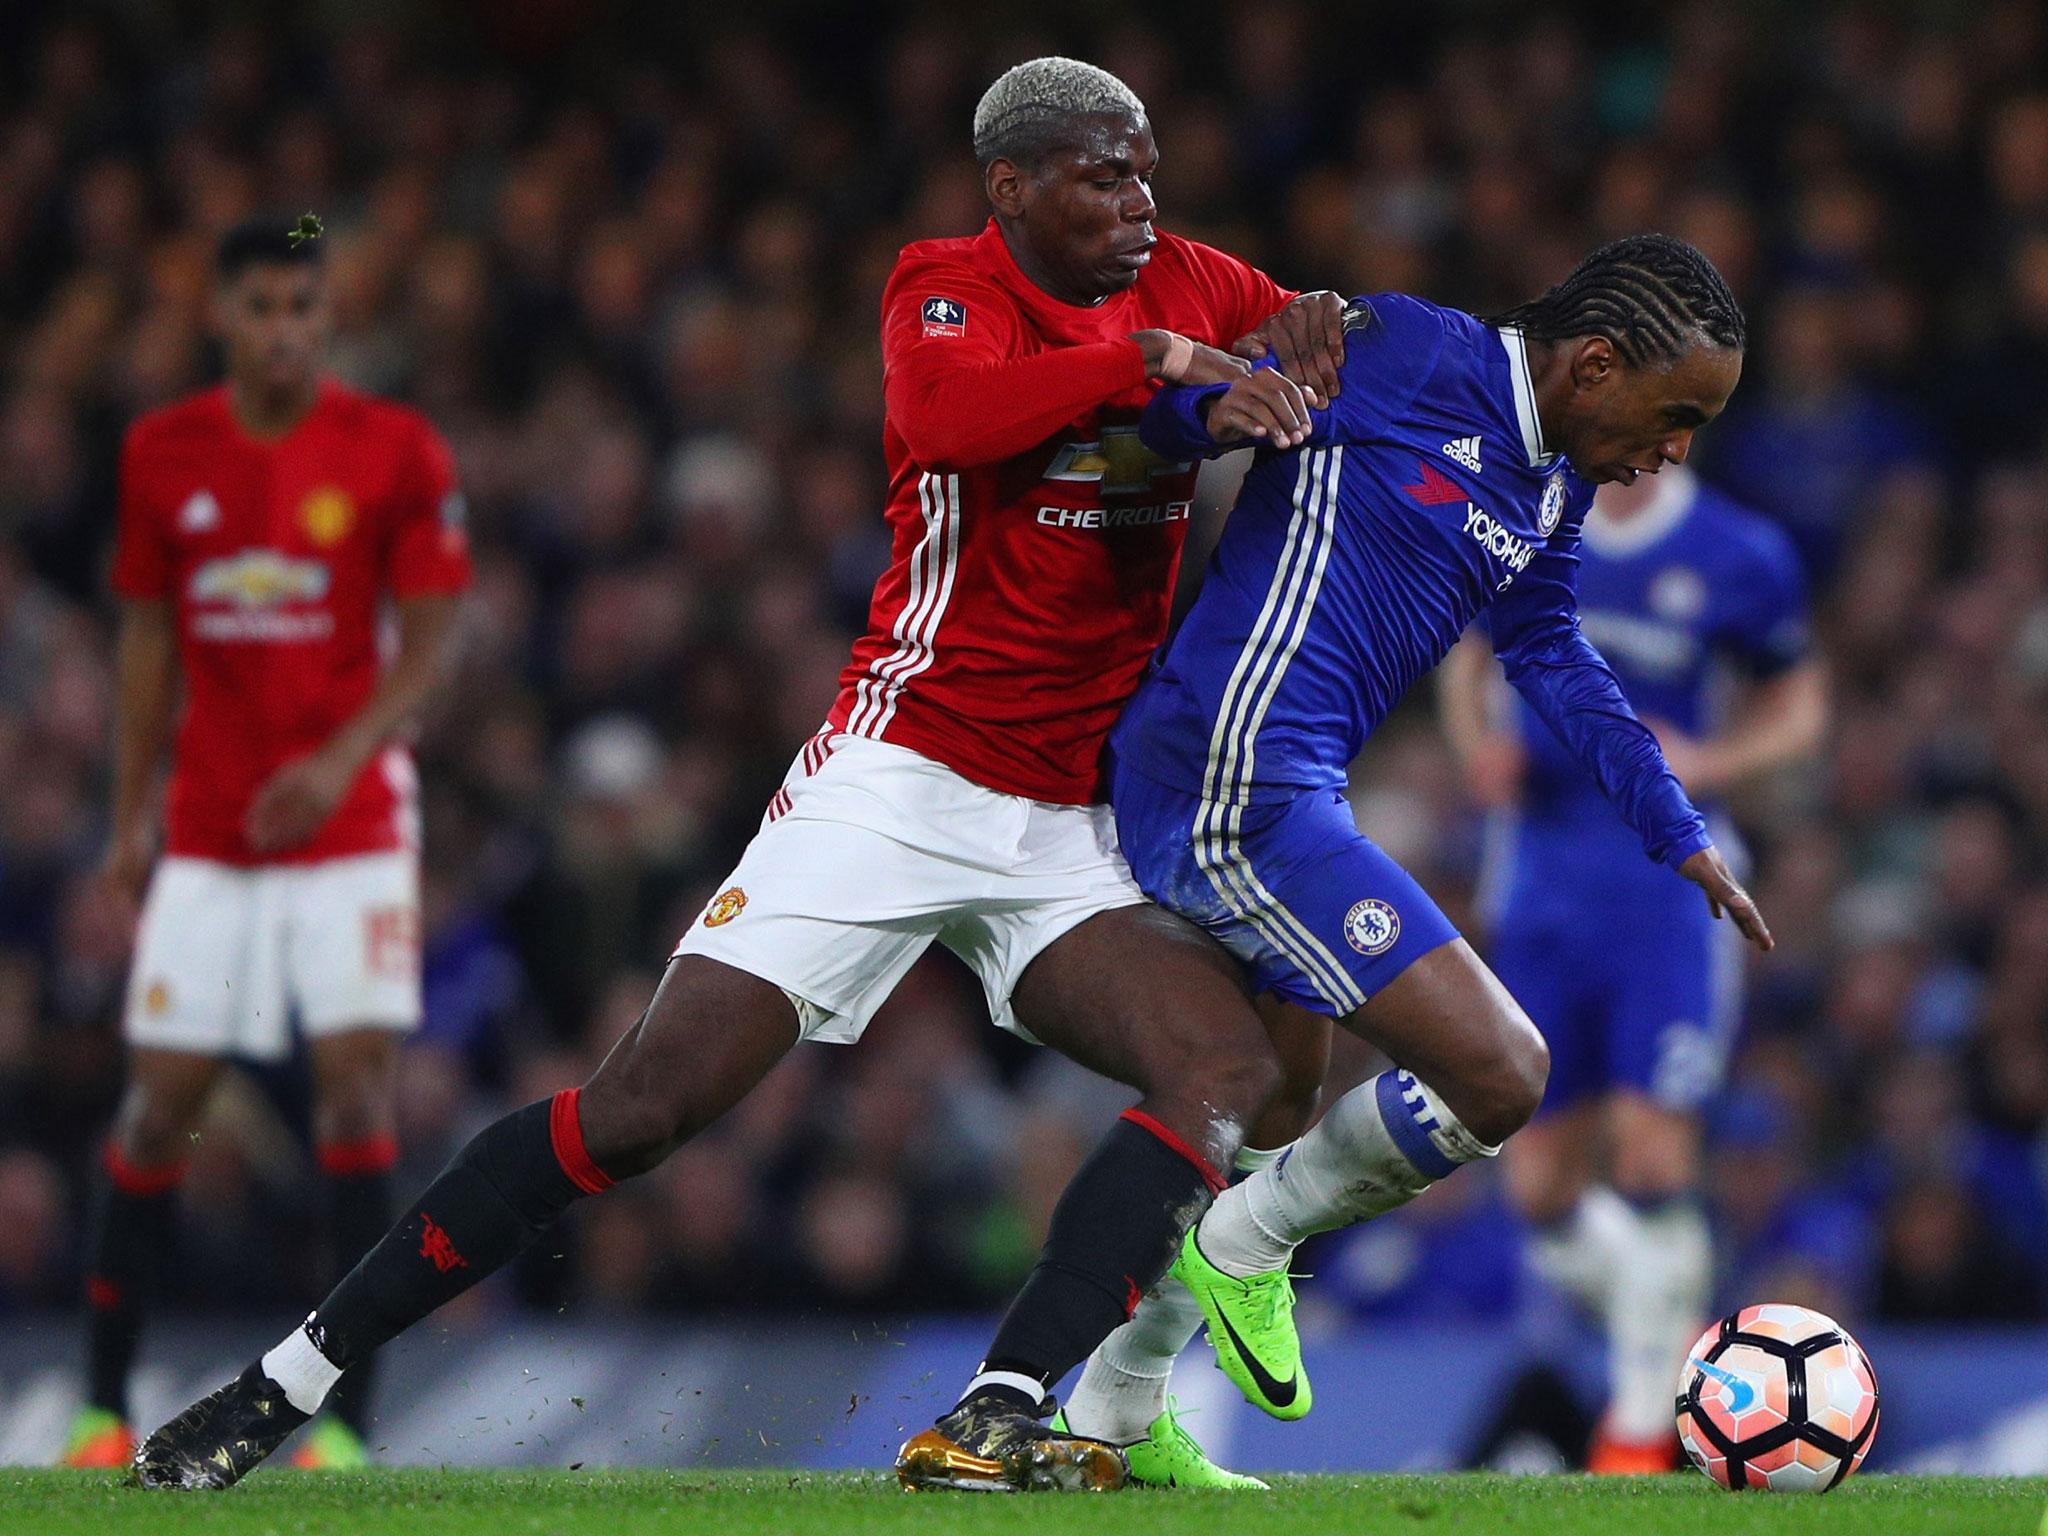 Paul Pogba's performance against Chelsea once again came in for scrutiny